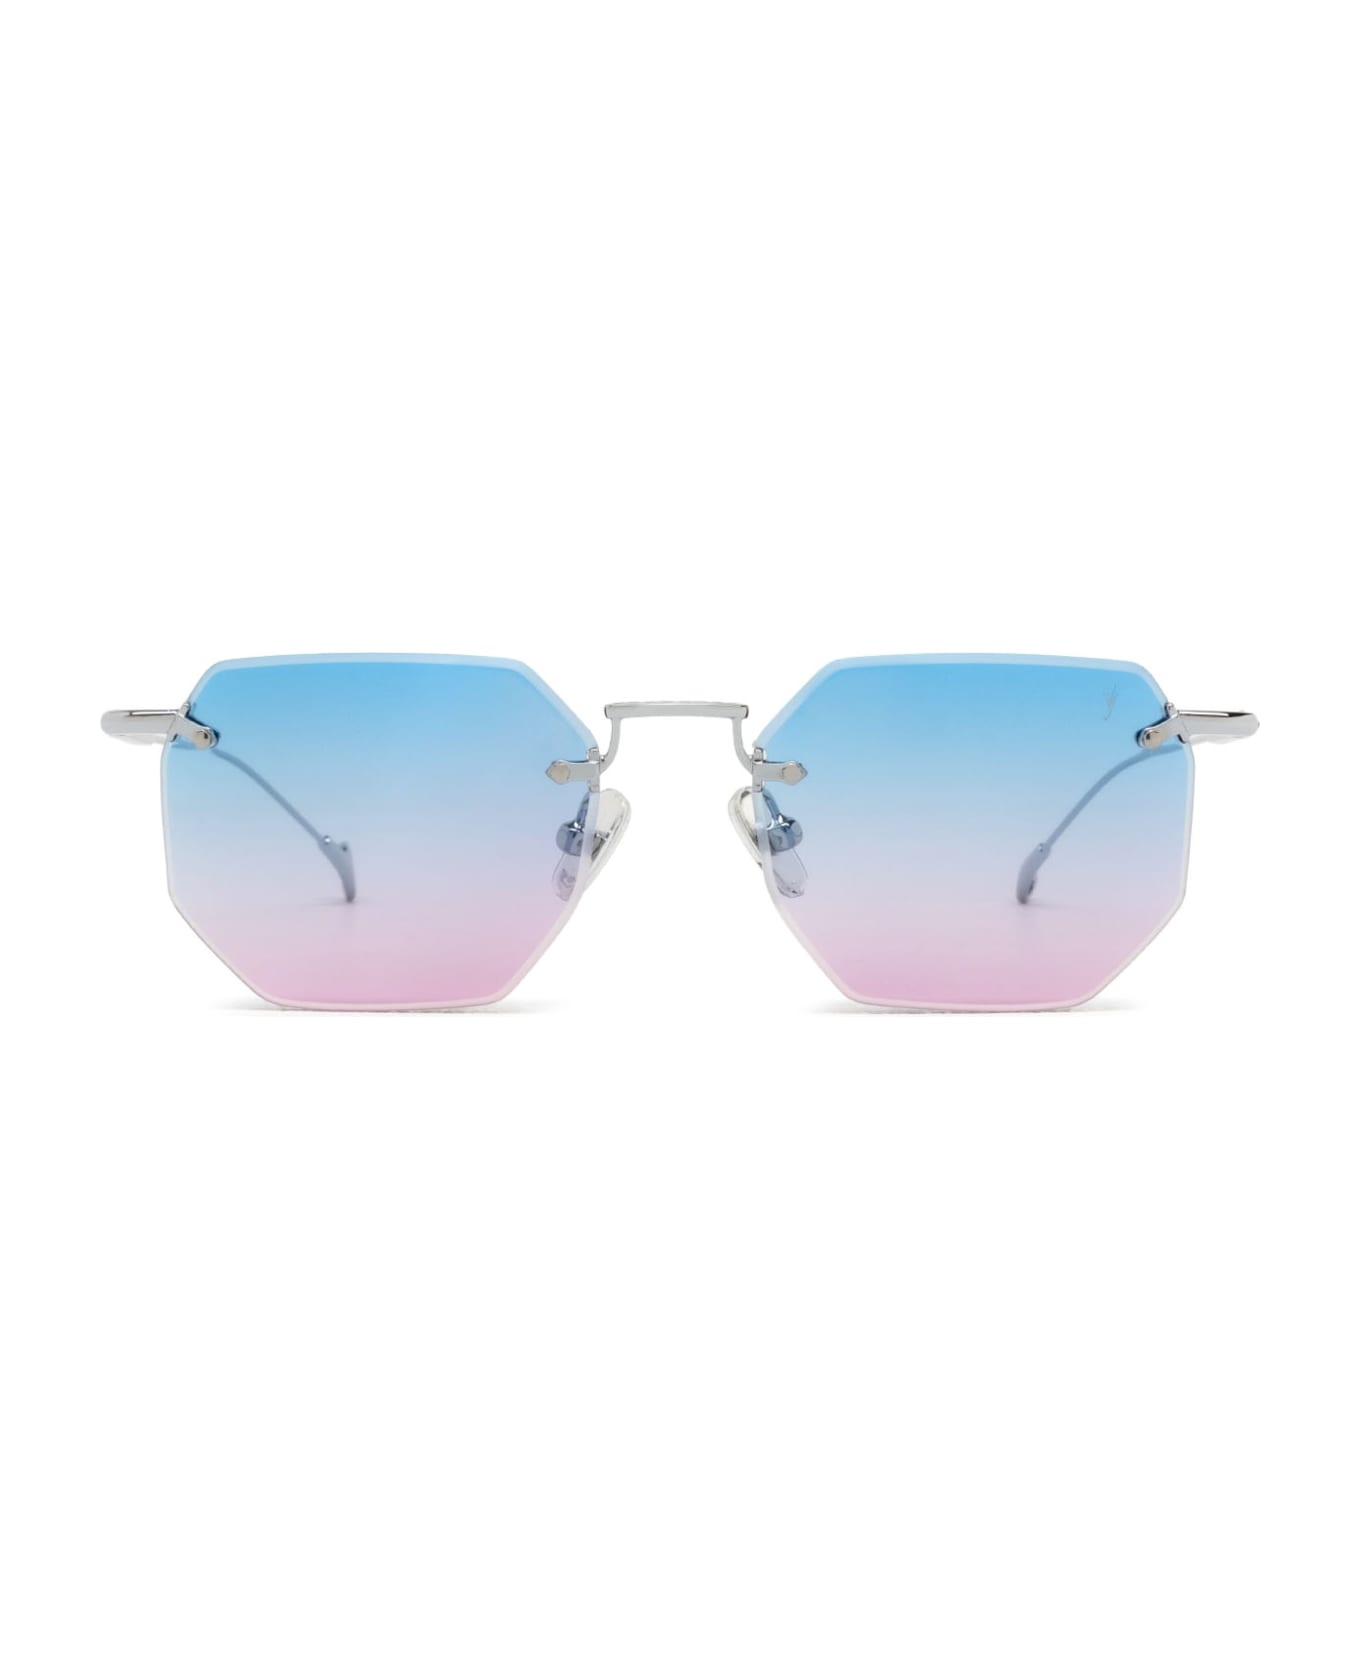 Eyepetizer Panthere Silver Sunglasses - Silver サングラス